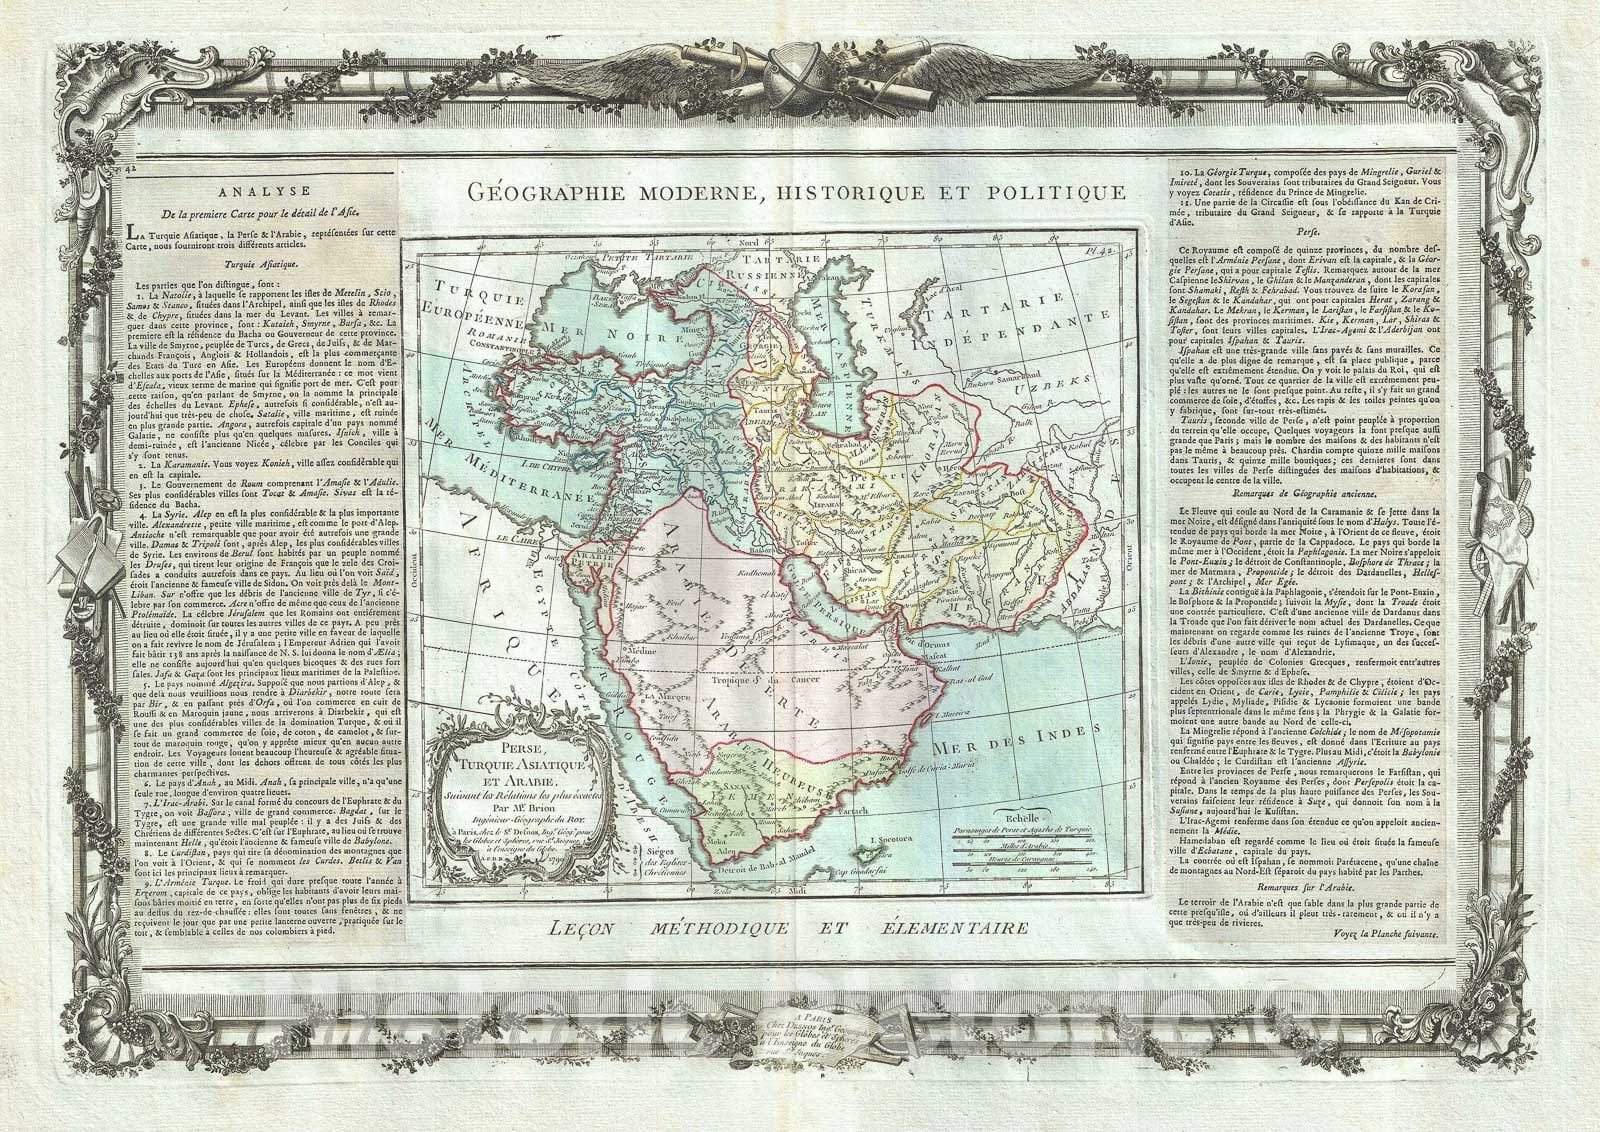 Historic Map : Arabia, Persia and Turkey, Desnos, 1786, Vintage Wall Art